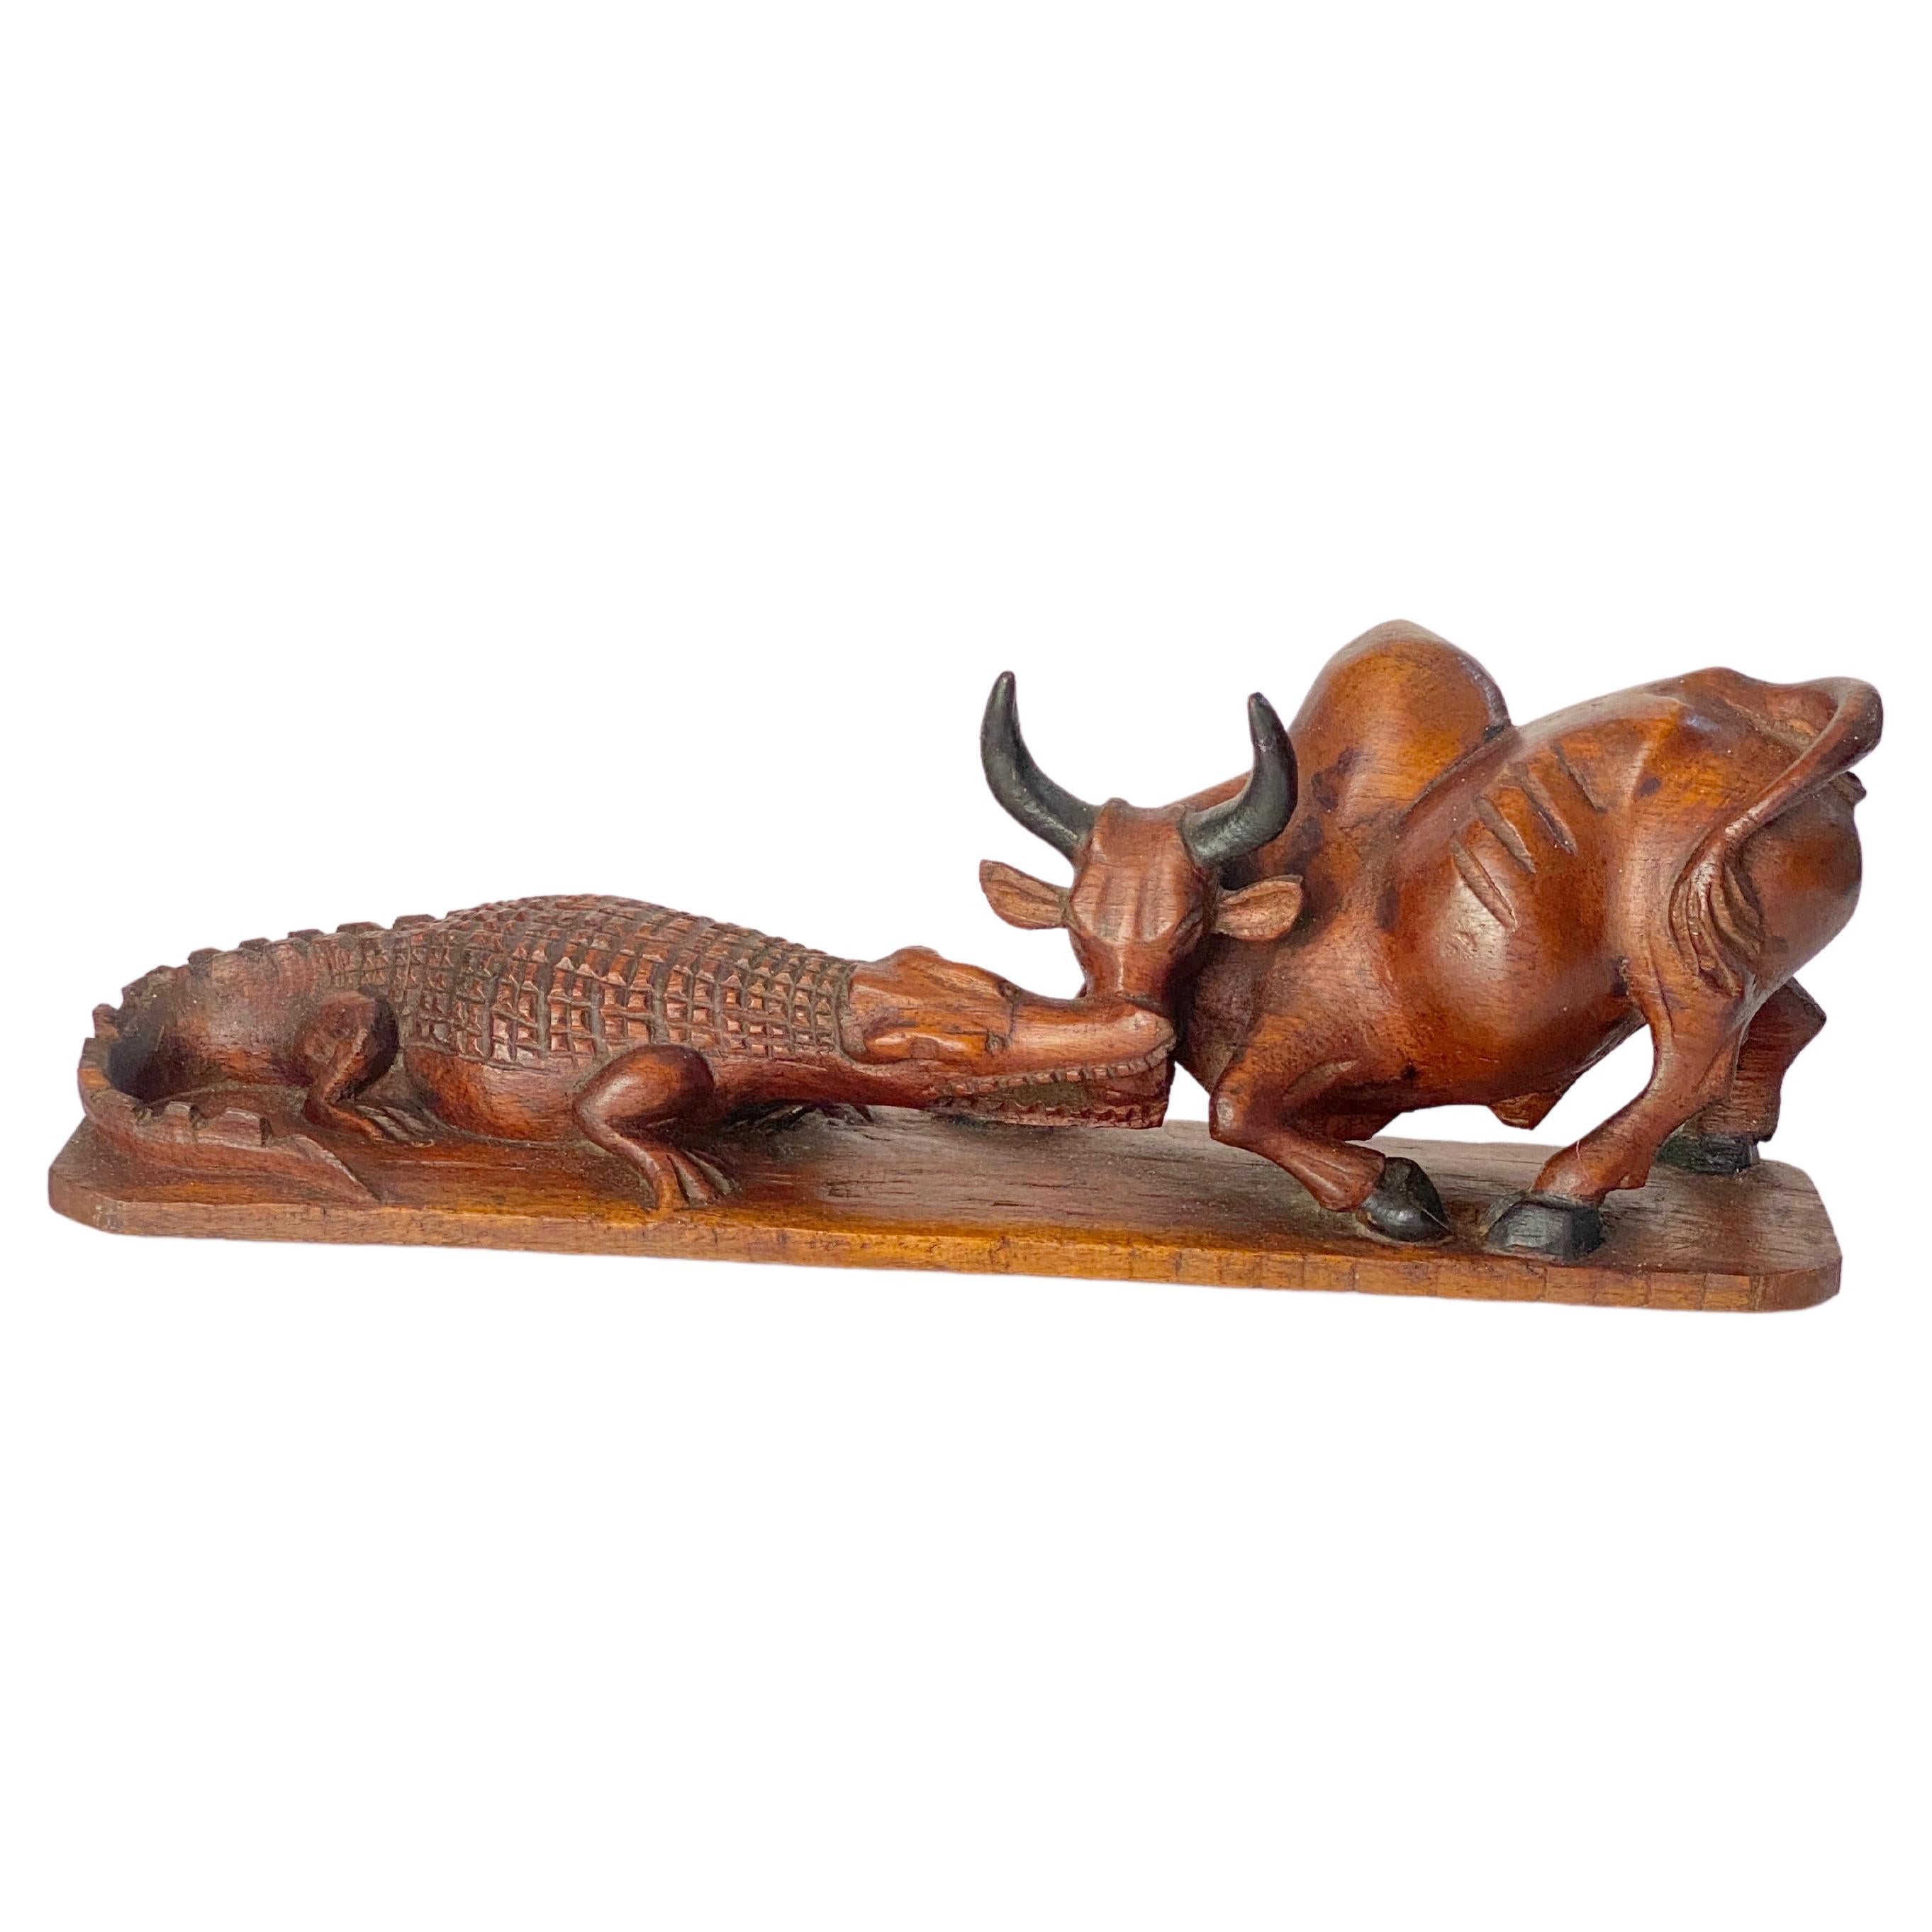 Wood Sculpture Representing a Crocodile and a Bull Fighting, in Wood France 1930 For Sale